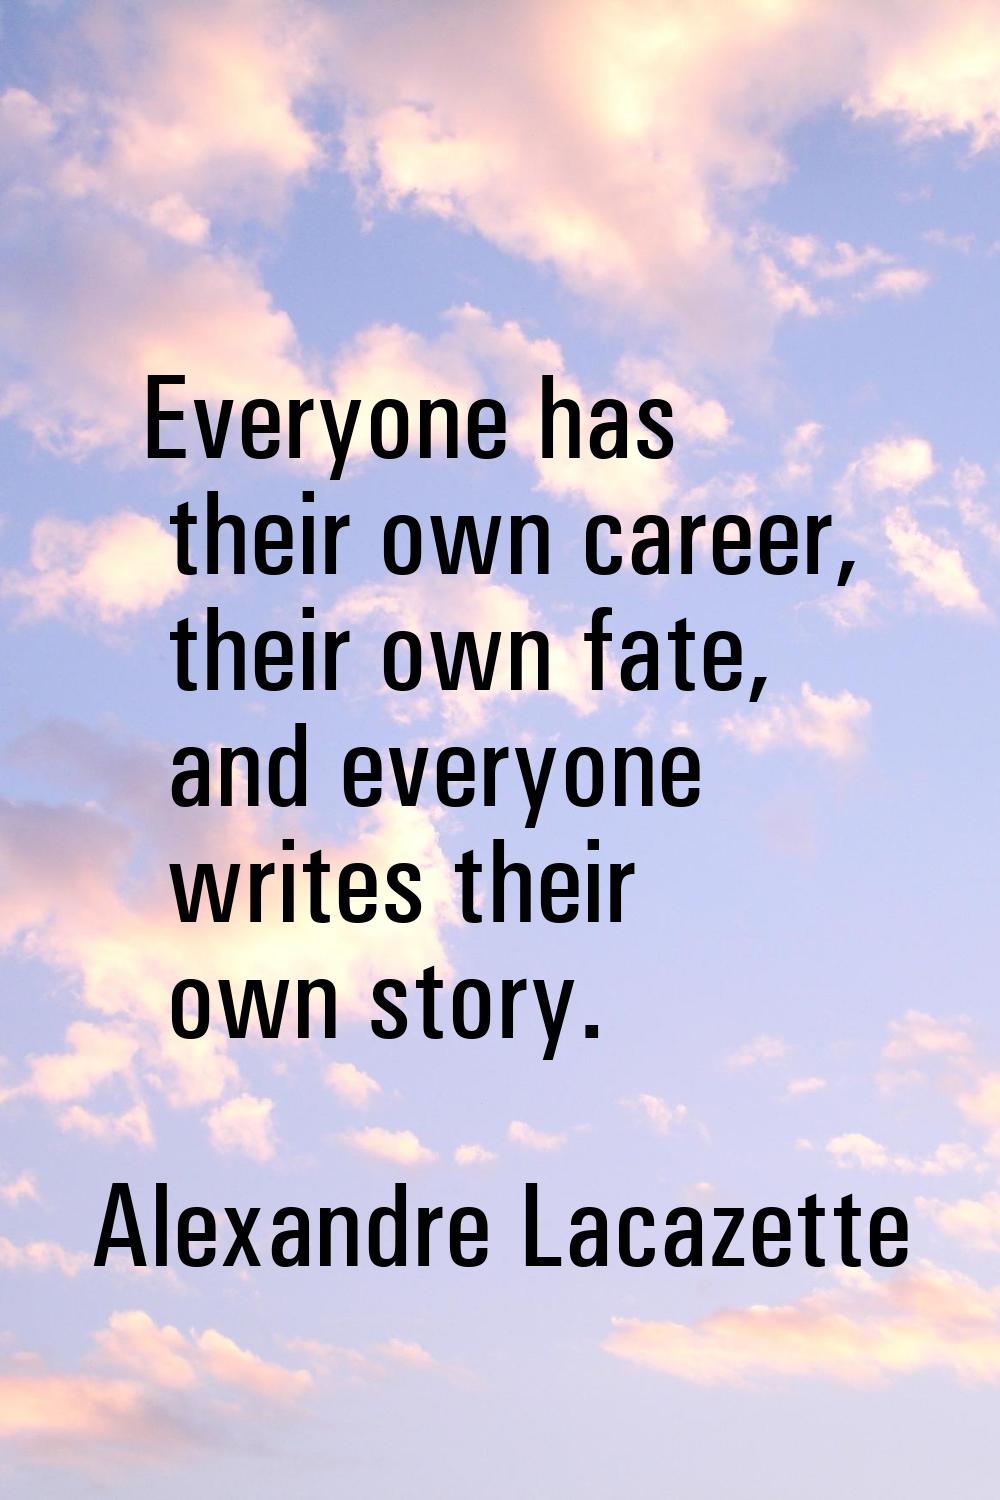 Everyone has their own career, their own fate, and everyone writes their own story.